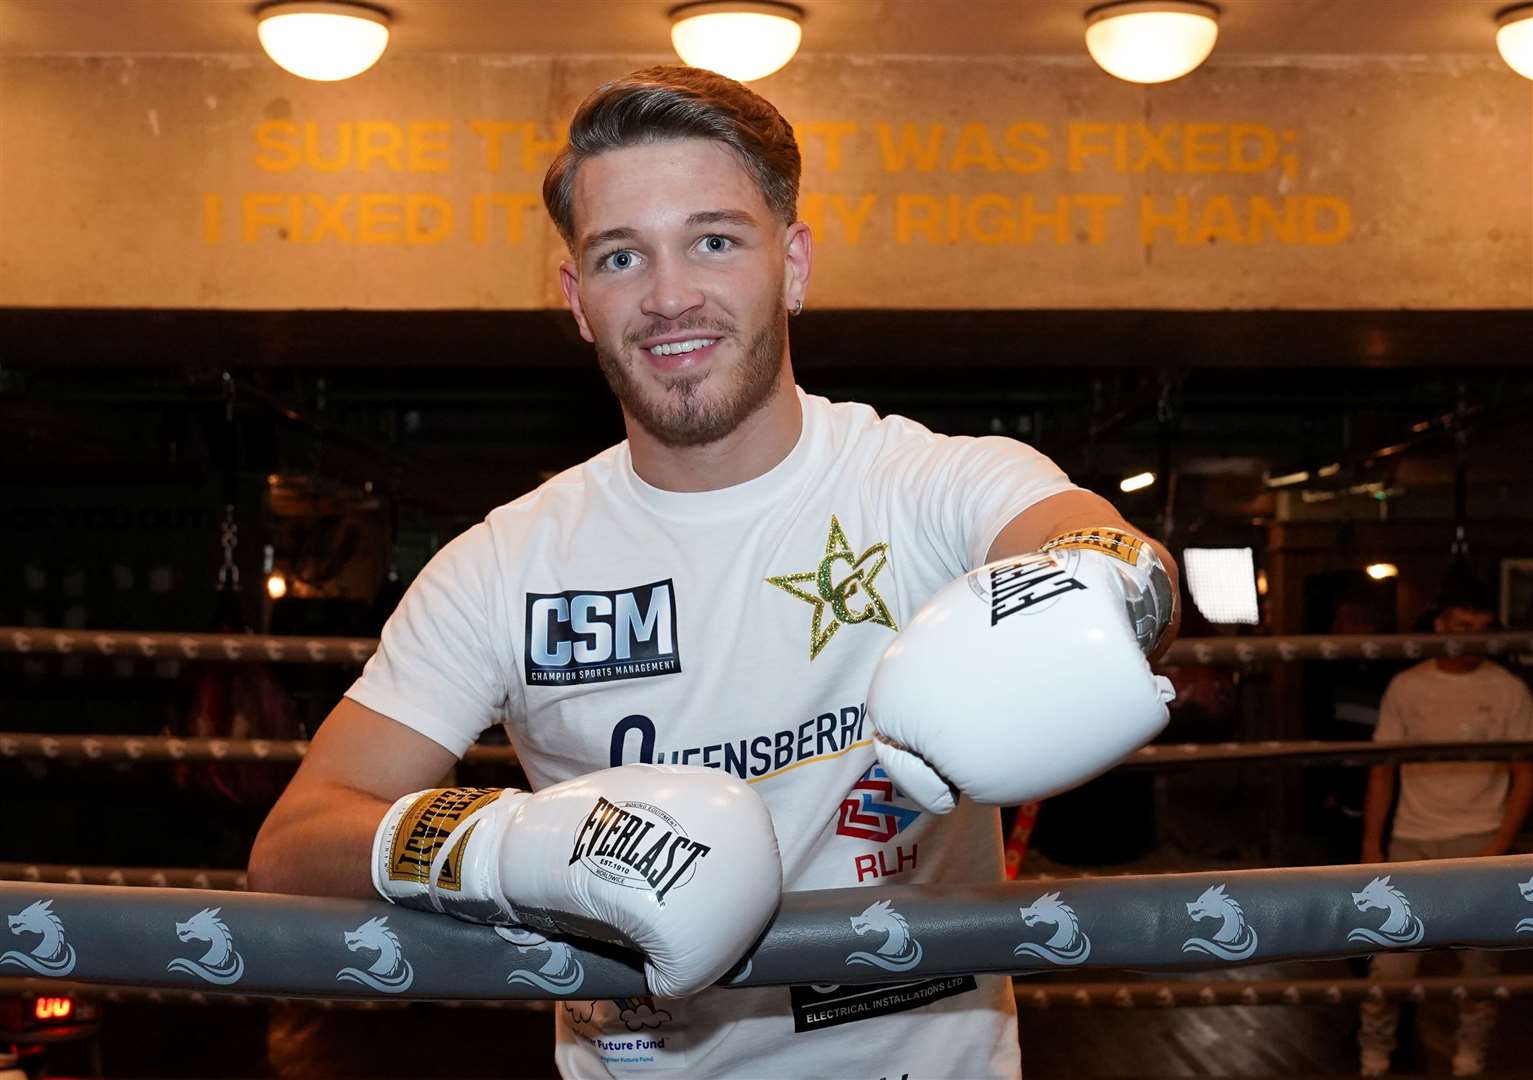 Charlie Hickford can’t wait to step inside the ring at theCopper Box Picture: Stephen Dunkley / Queensberry Promotions